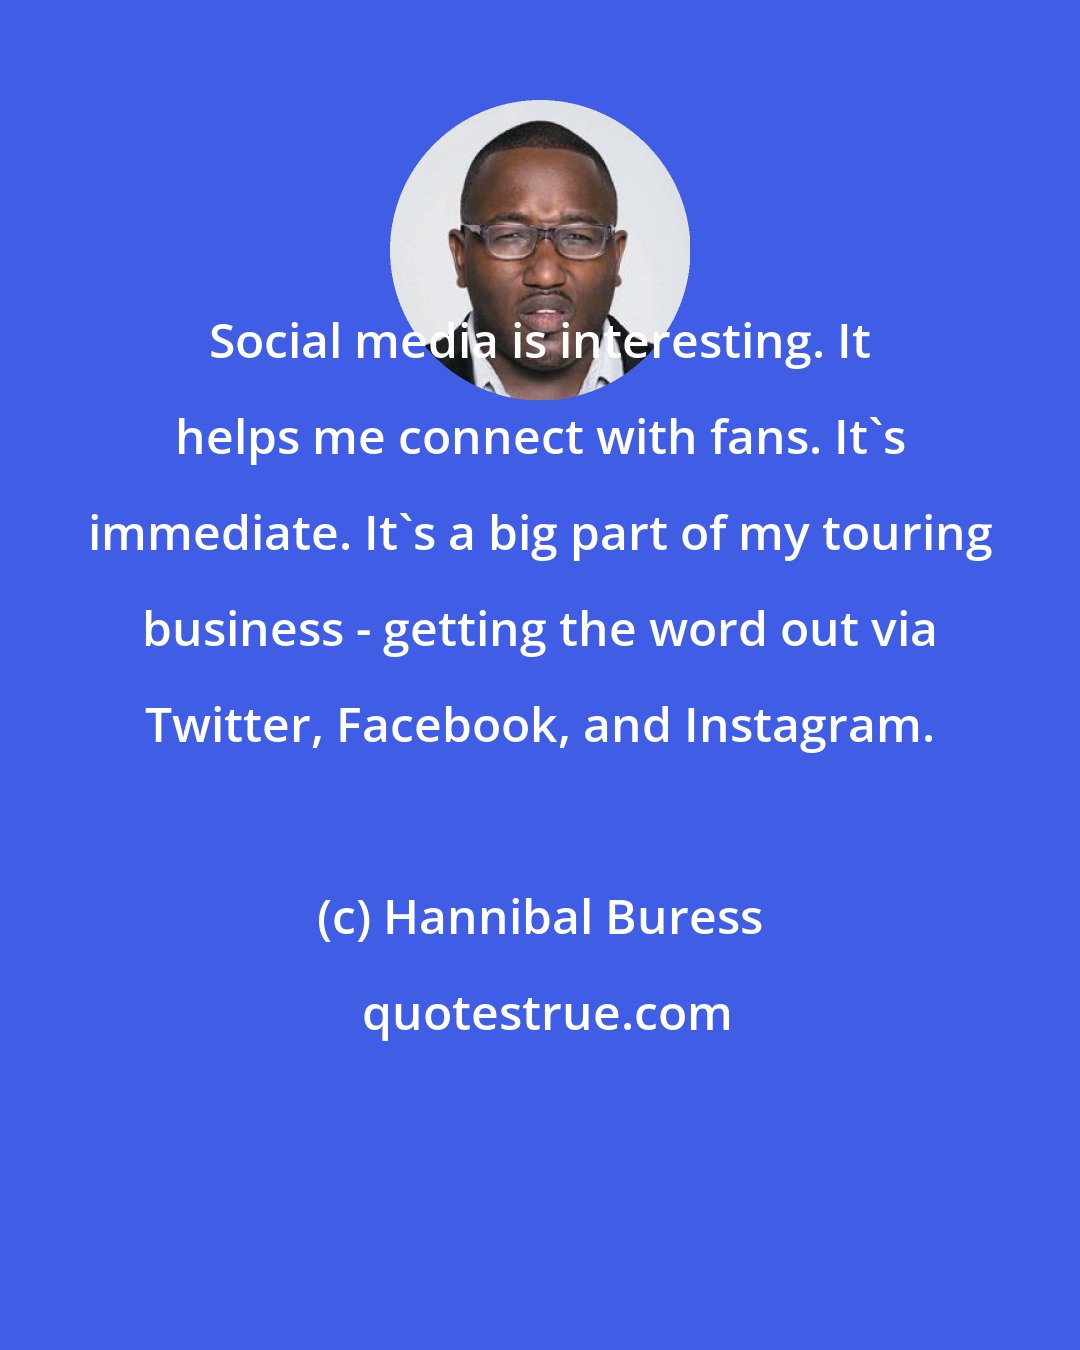 Hannibal Buress: Social media is interesting. It helps me connect with fans. It's immediate. It's a big part of my touring business - getting the word out via Twitter, Facebook, and Instagram.